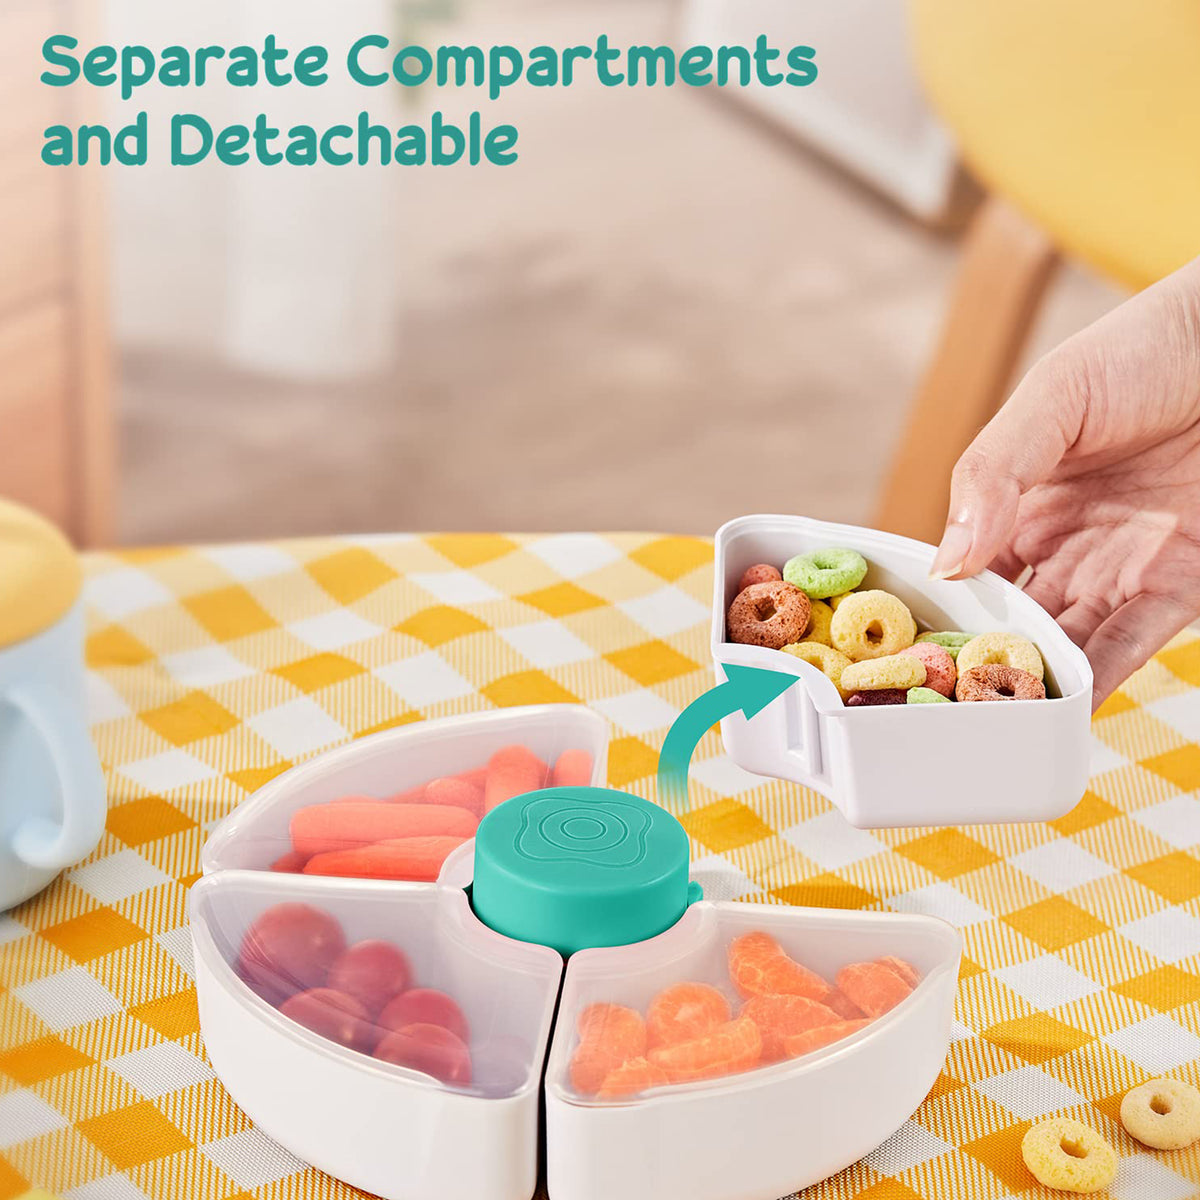 HEETA Baby Food Storage Container, Snack Box for Kids with 4 Removable  Compartment and Lids, Reusable Snack Containers, Food Grade PP Material,  BPA 